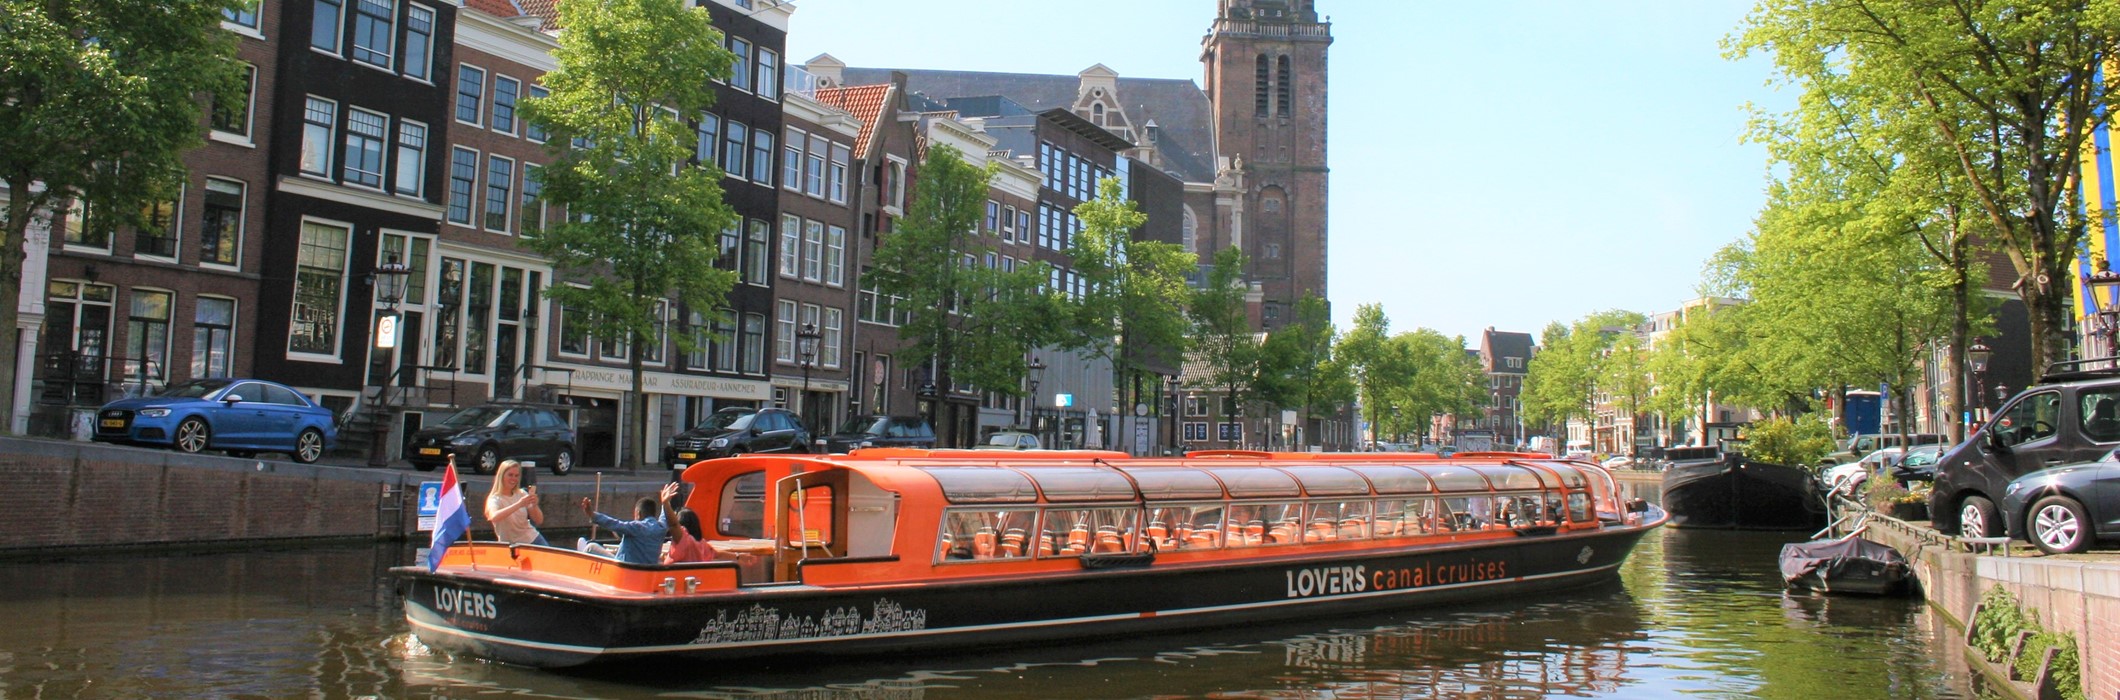 1 h. Amsterdam Day Canal Cruise (departs near Leidse square)